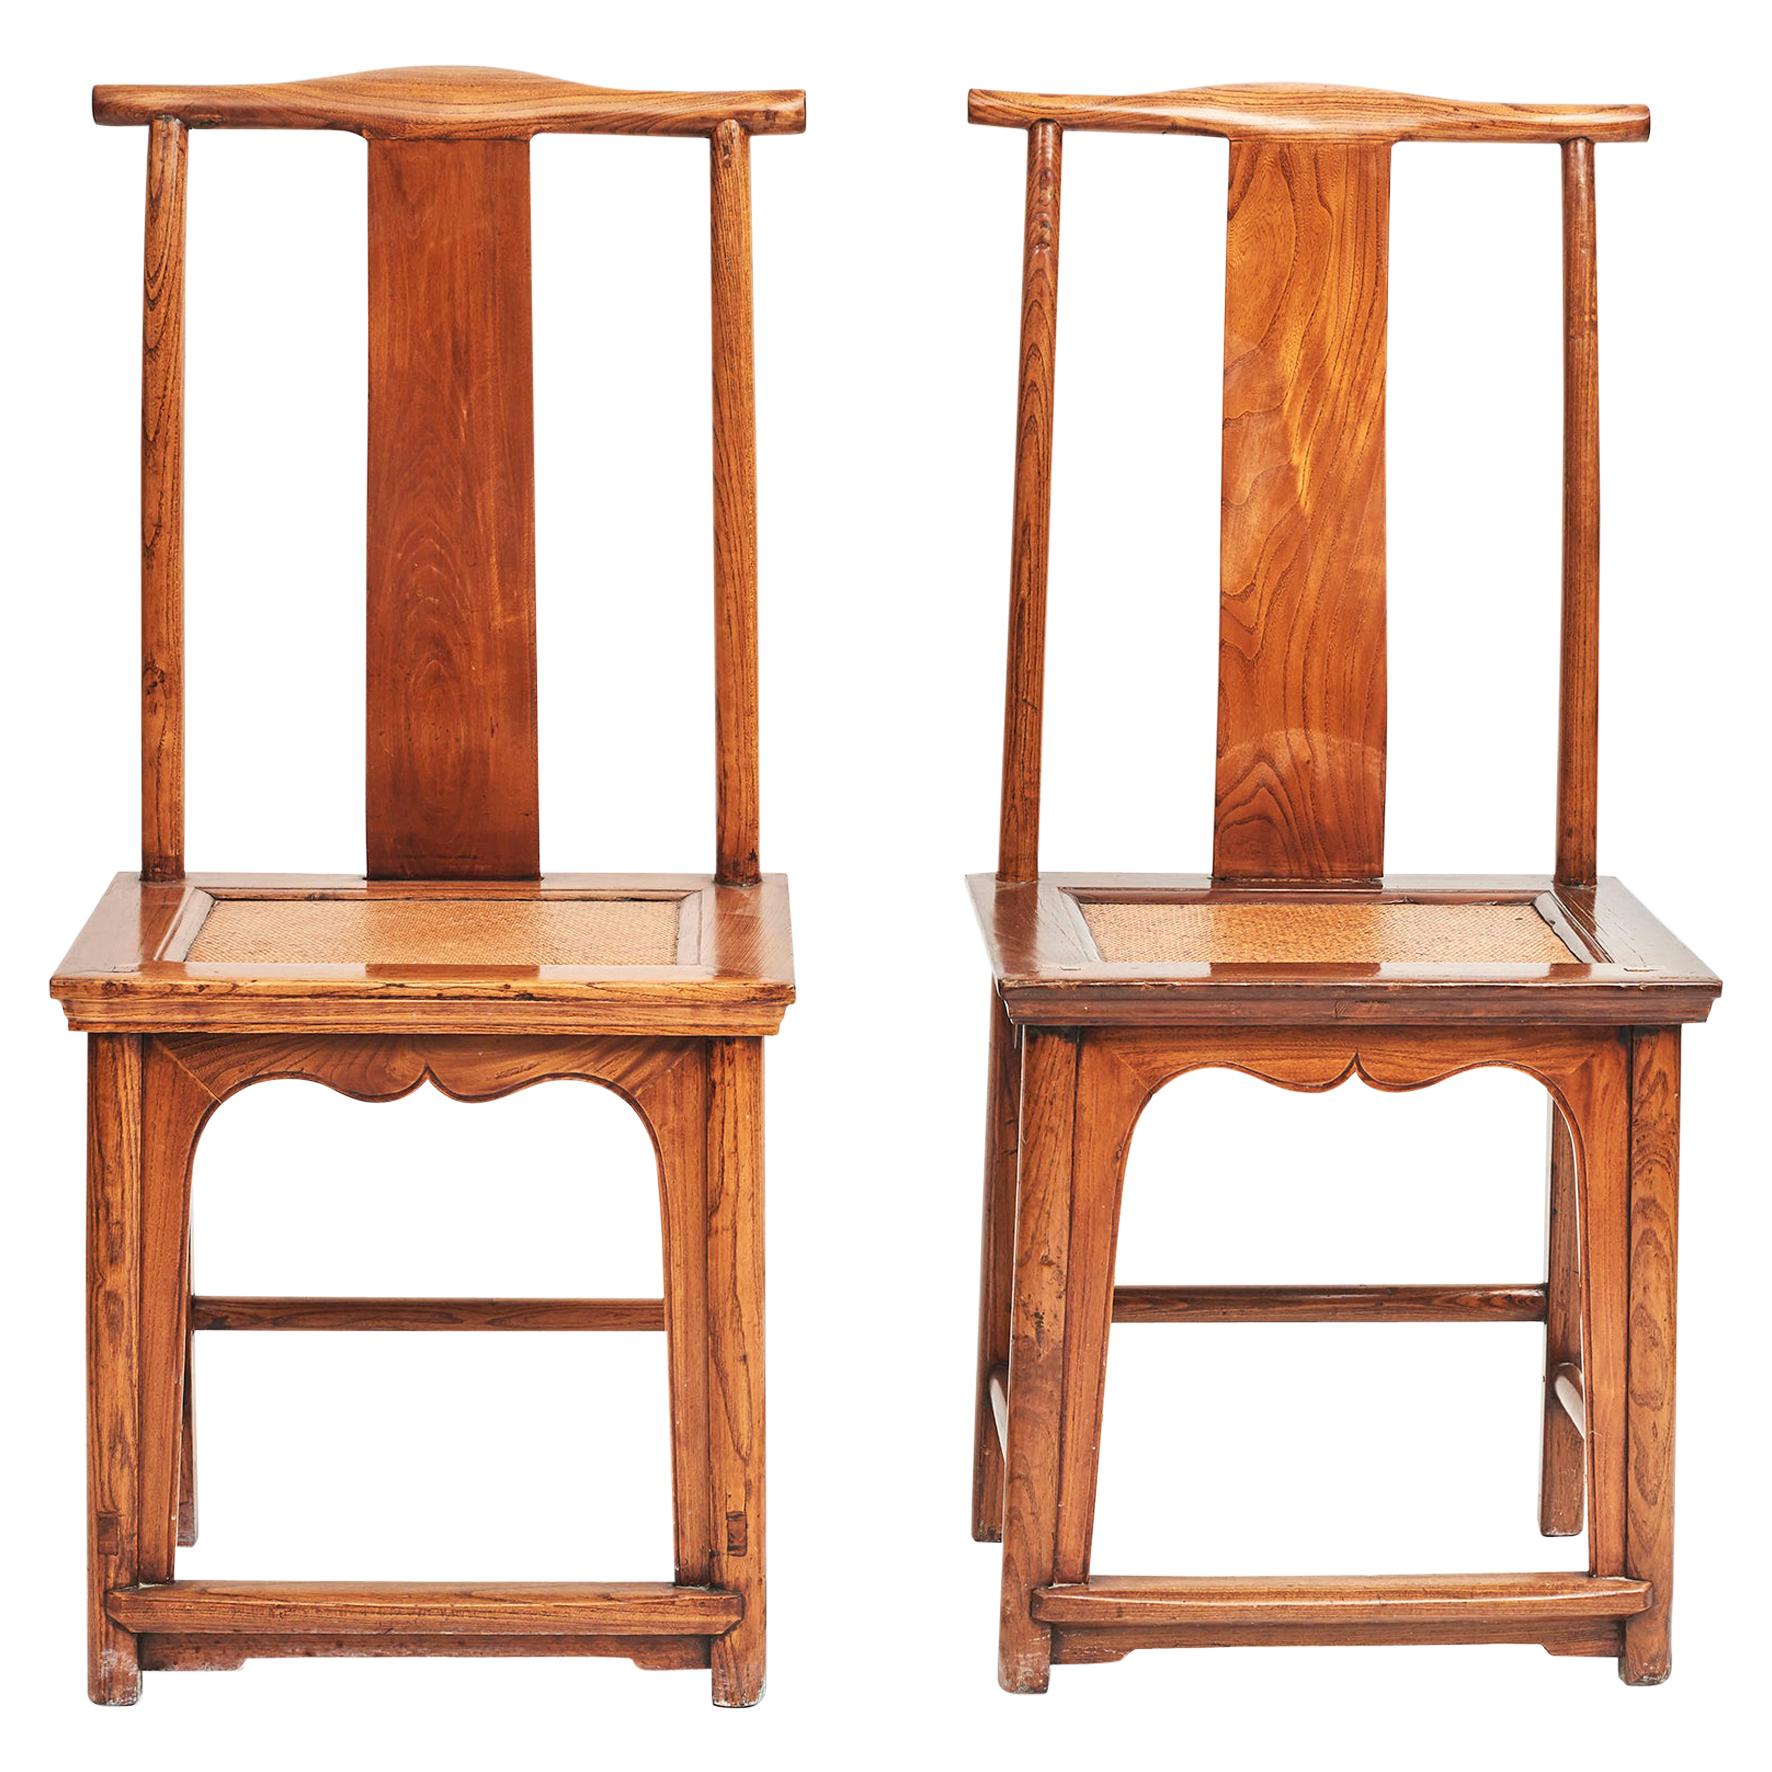 Pair of Mid-19th Century Chinese Ming Style Chairs in Jumu Wood with Wicker Seat